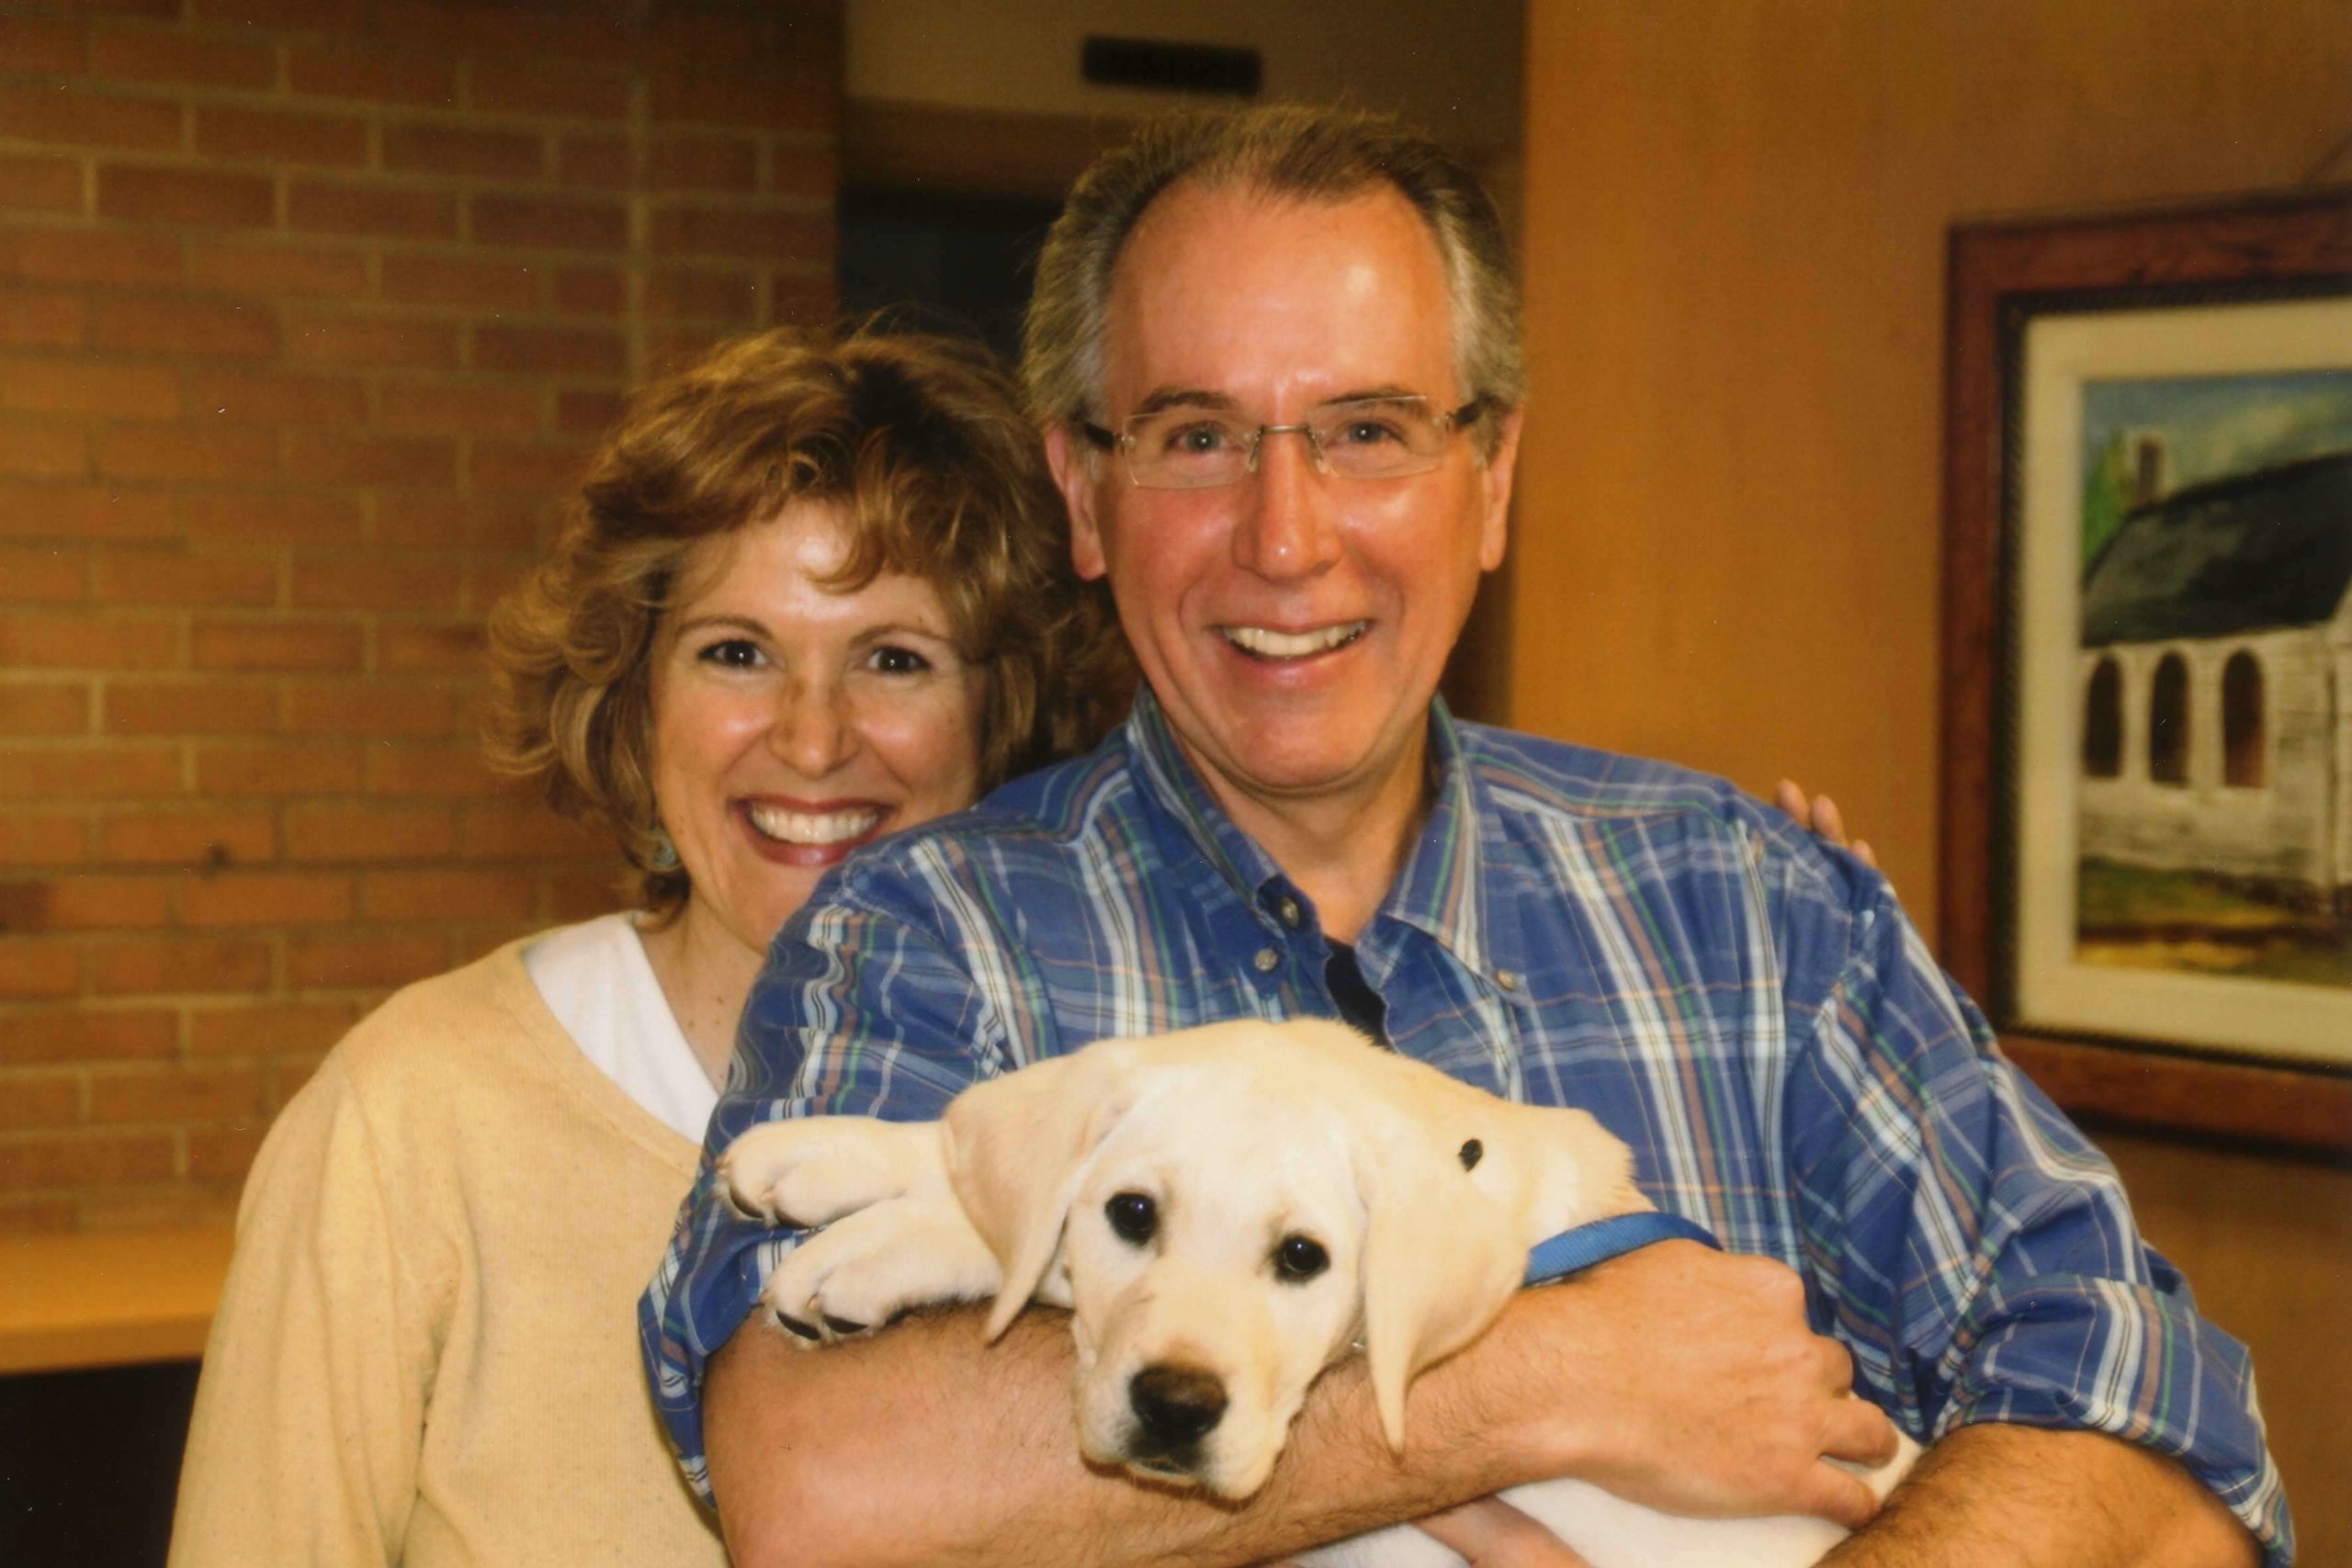 Michelle and Frank Chenette with Guiding Eyes pup Halo